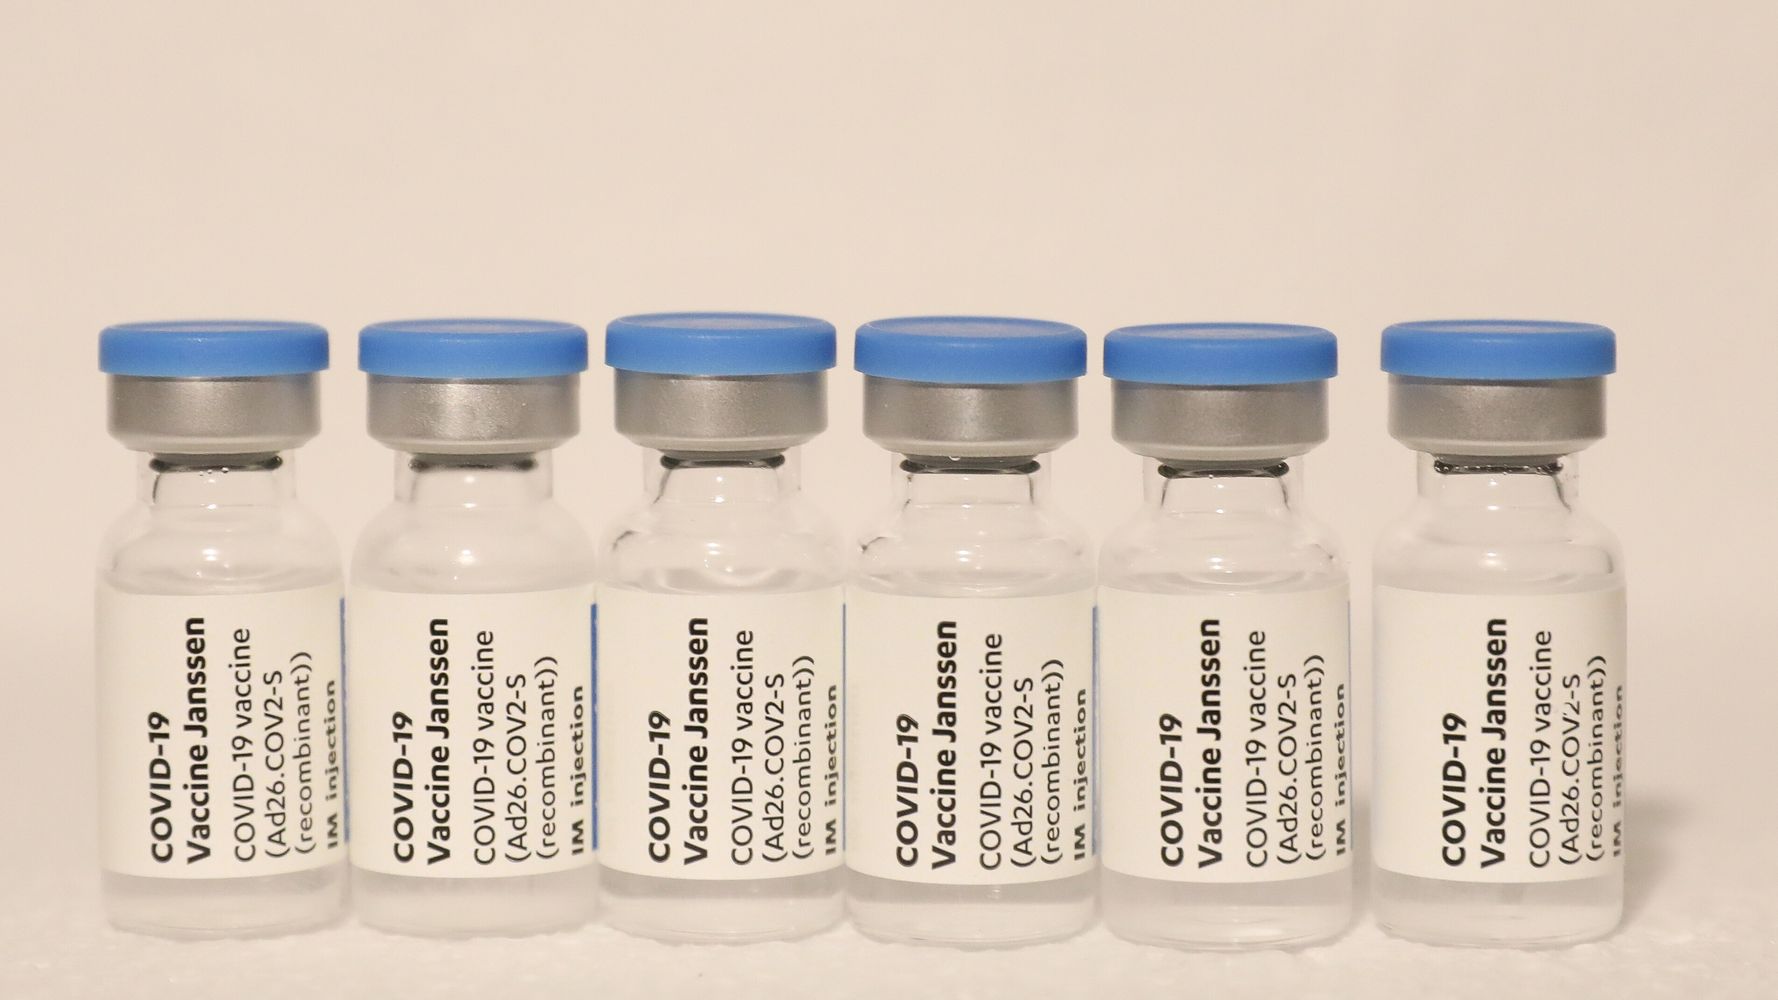 What To Know About The Johnson & Johnson COVID Vaccine And Guillain-Barre Syndrome